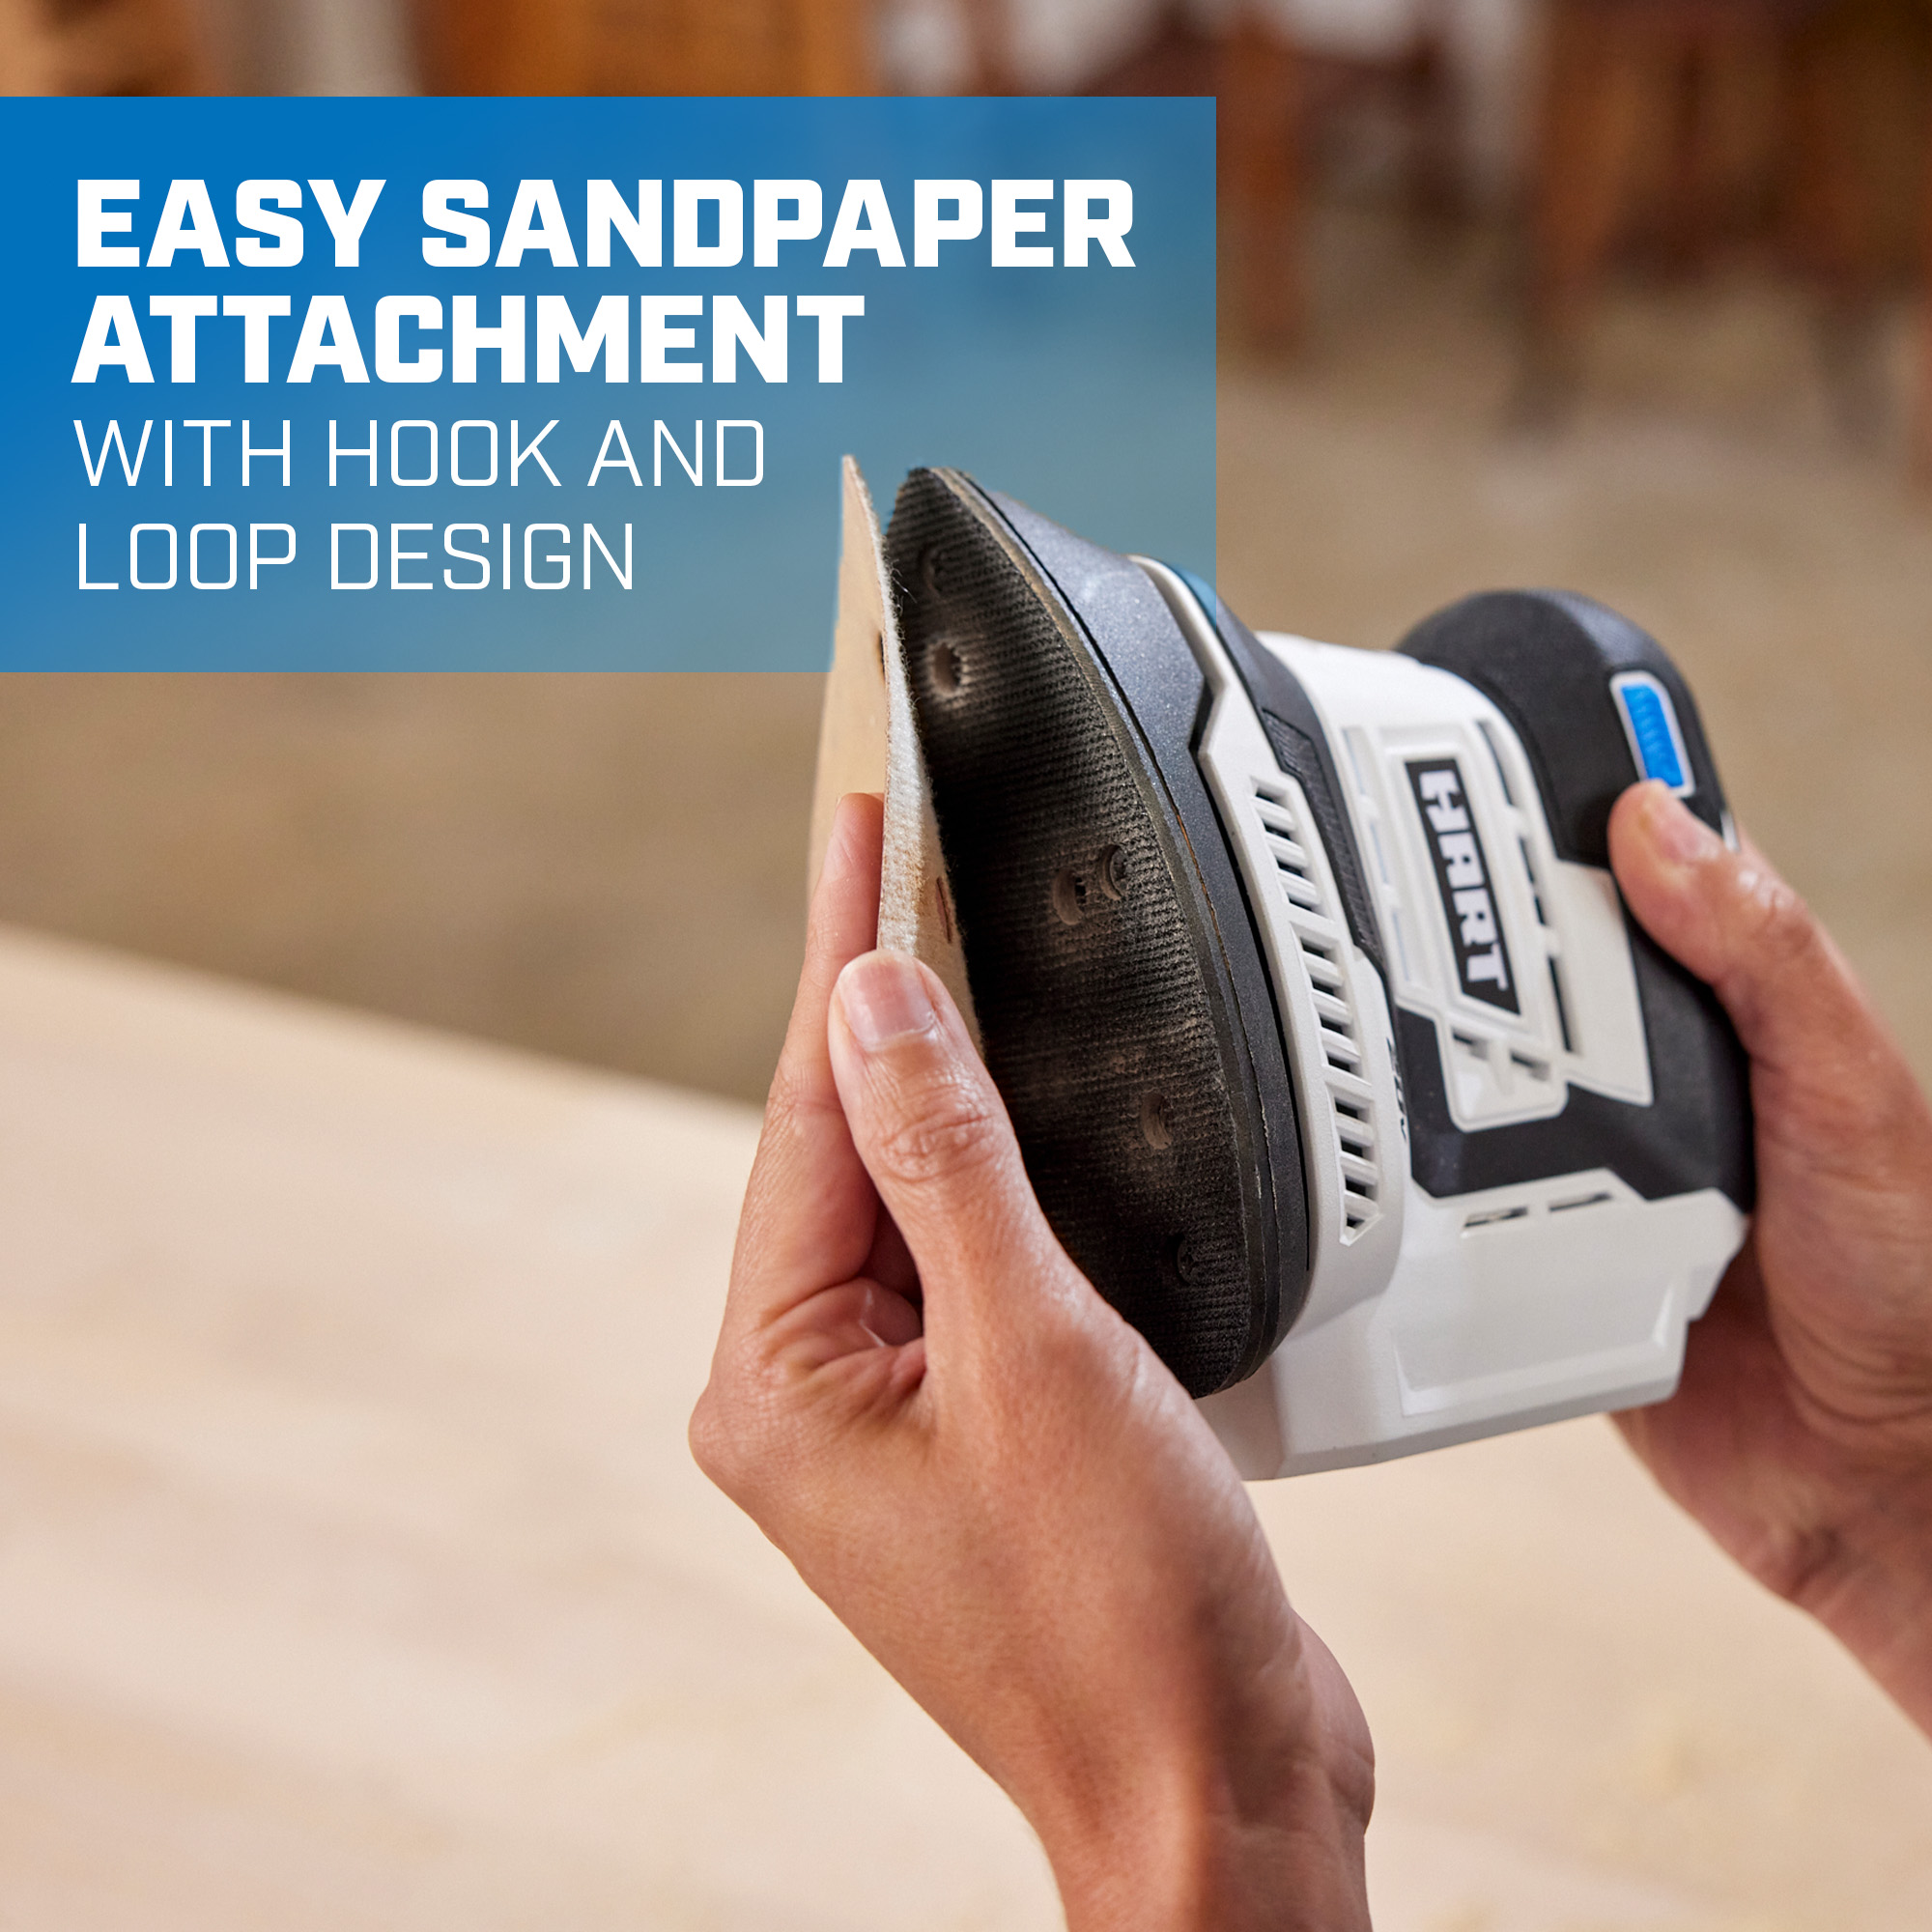 easy sandpaper attachment with hook and loop design